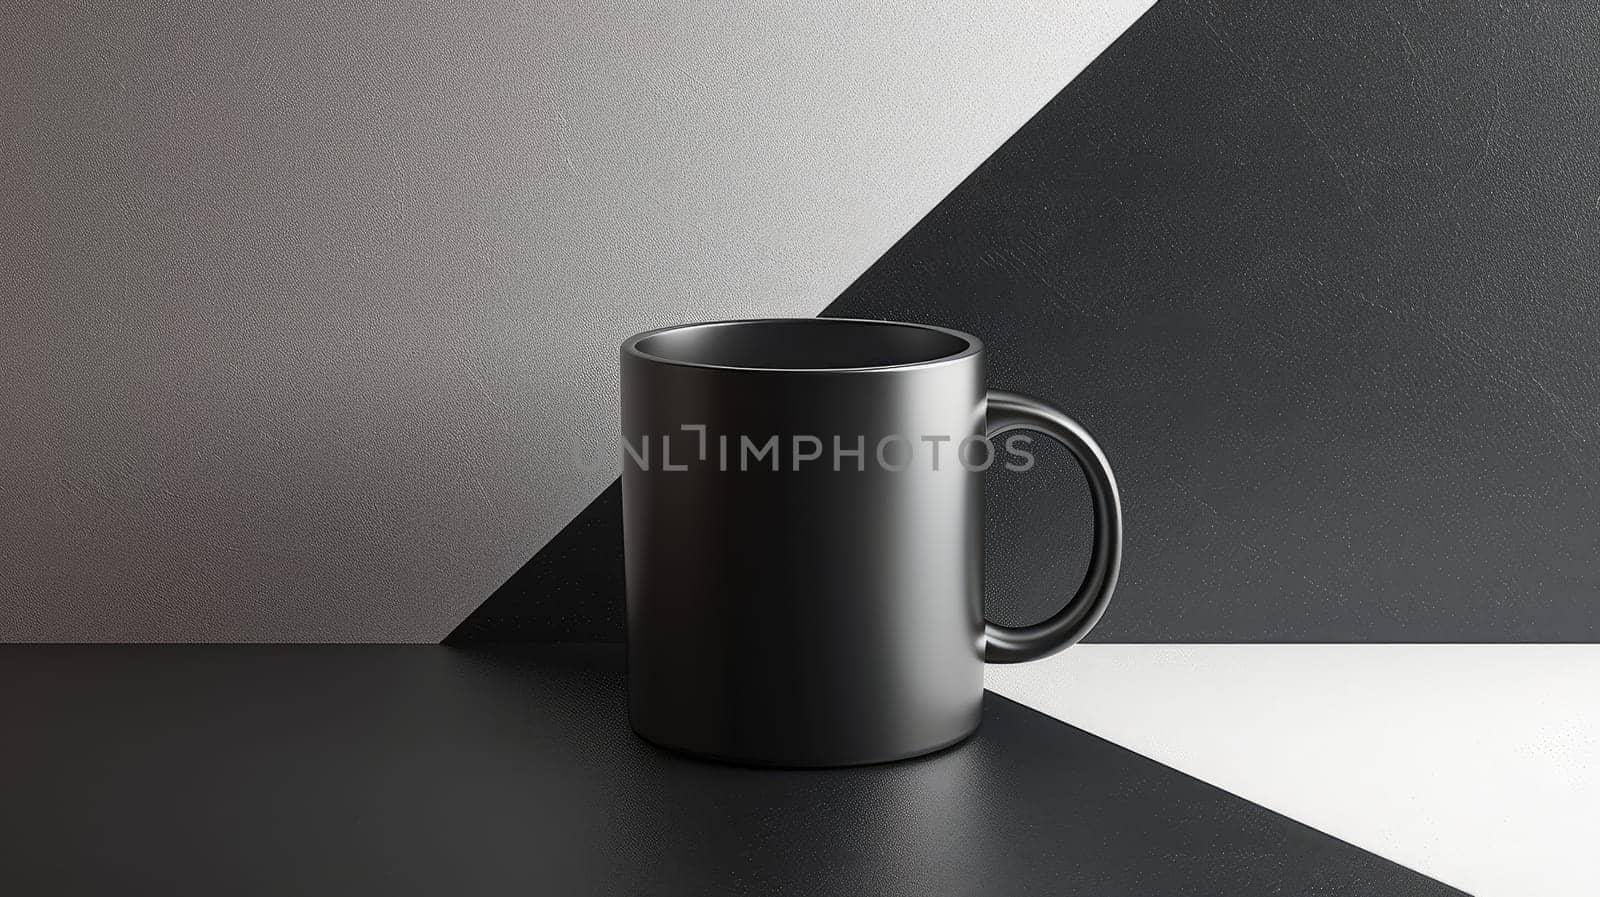 A modern mug placed on a smooth, monochrome surface with a geometric pattern backdrop, showcasing minimal style and clean lines.